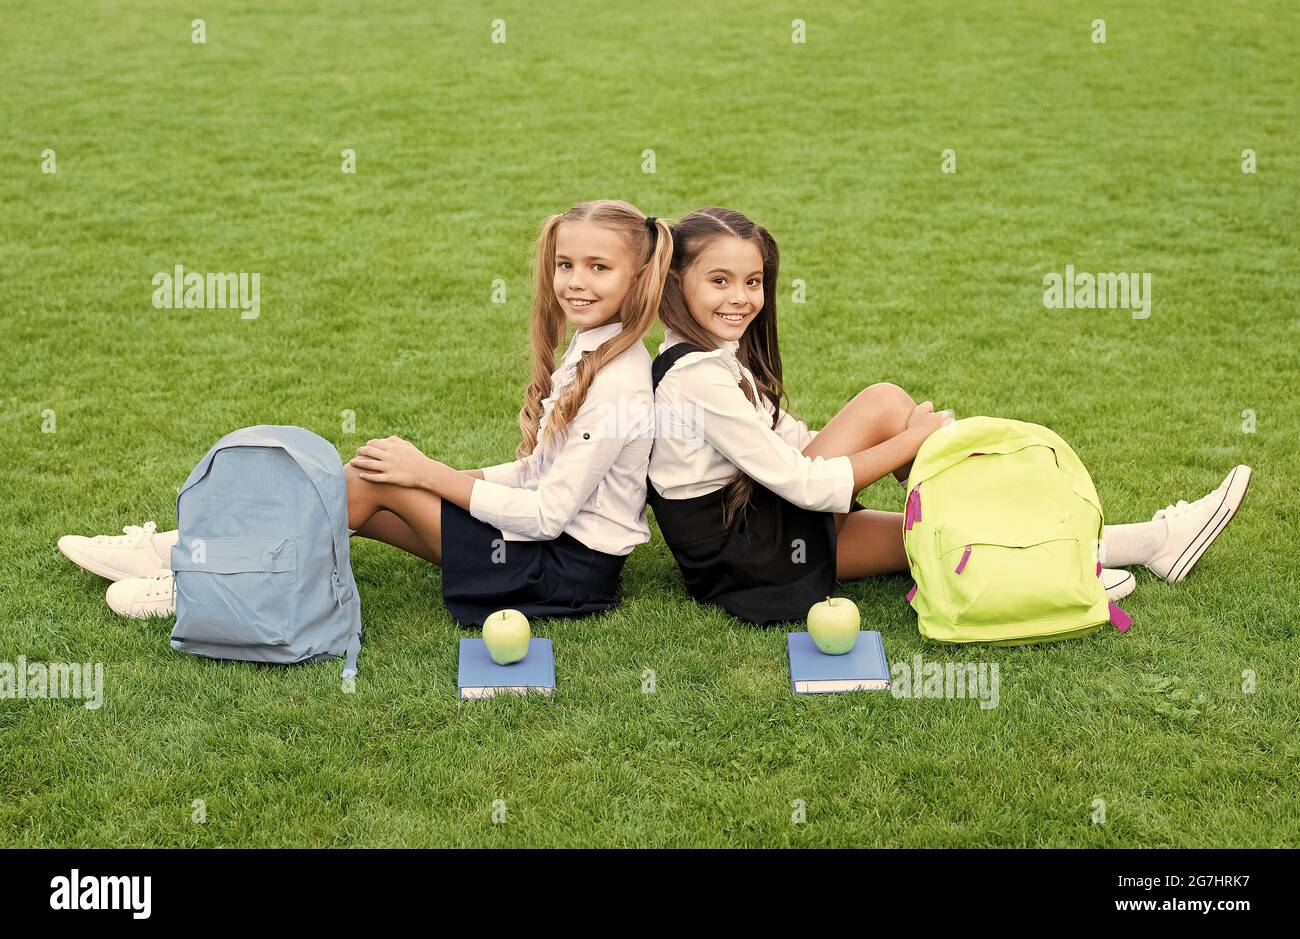 Friends makes you happy. School friends relax on green grass. Happy friends back to school. Classmate friends. School and education. Happy friendship Stock Photo